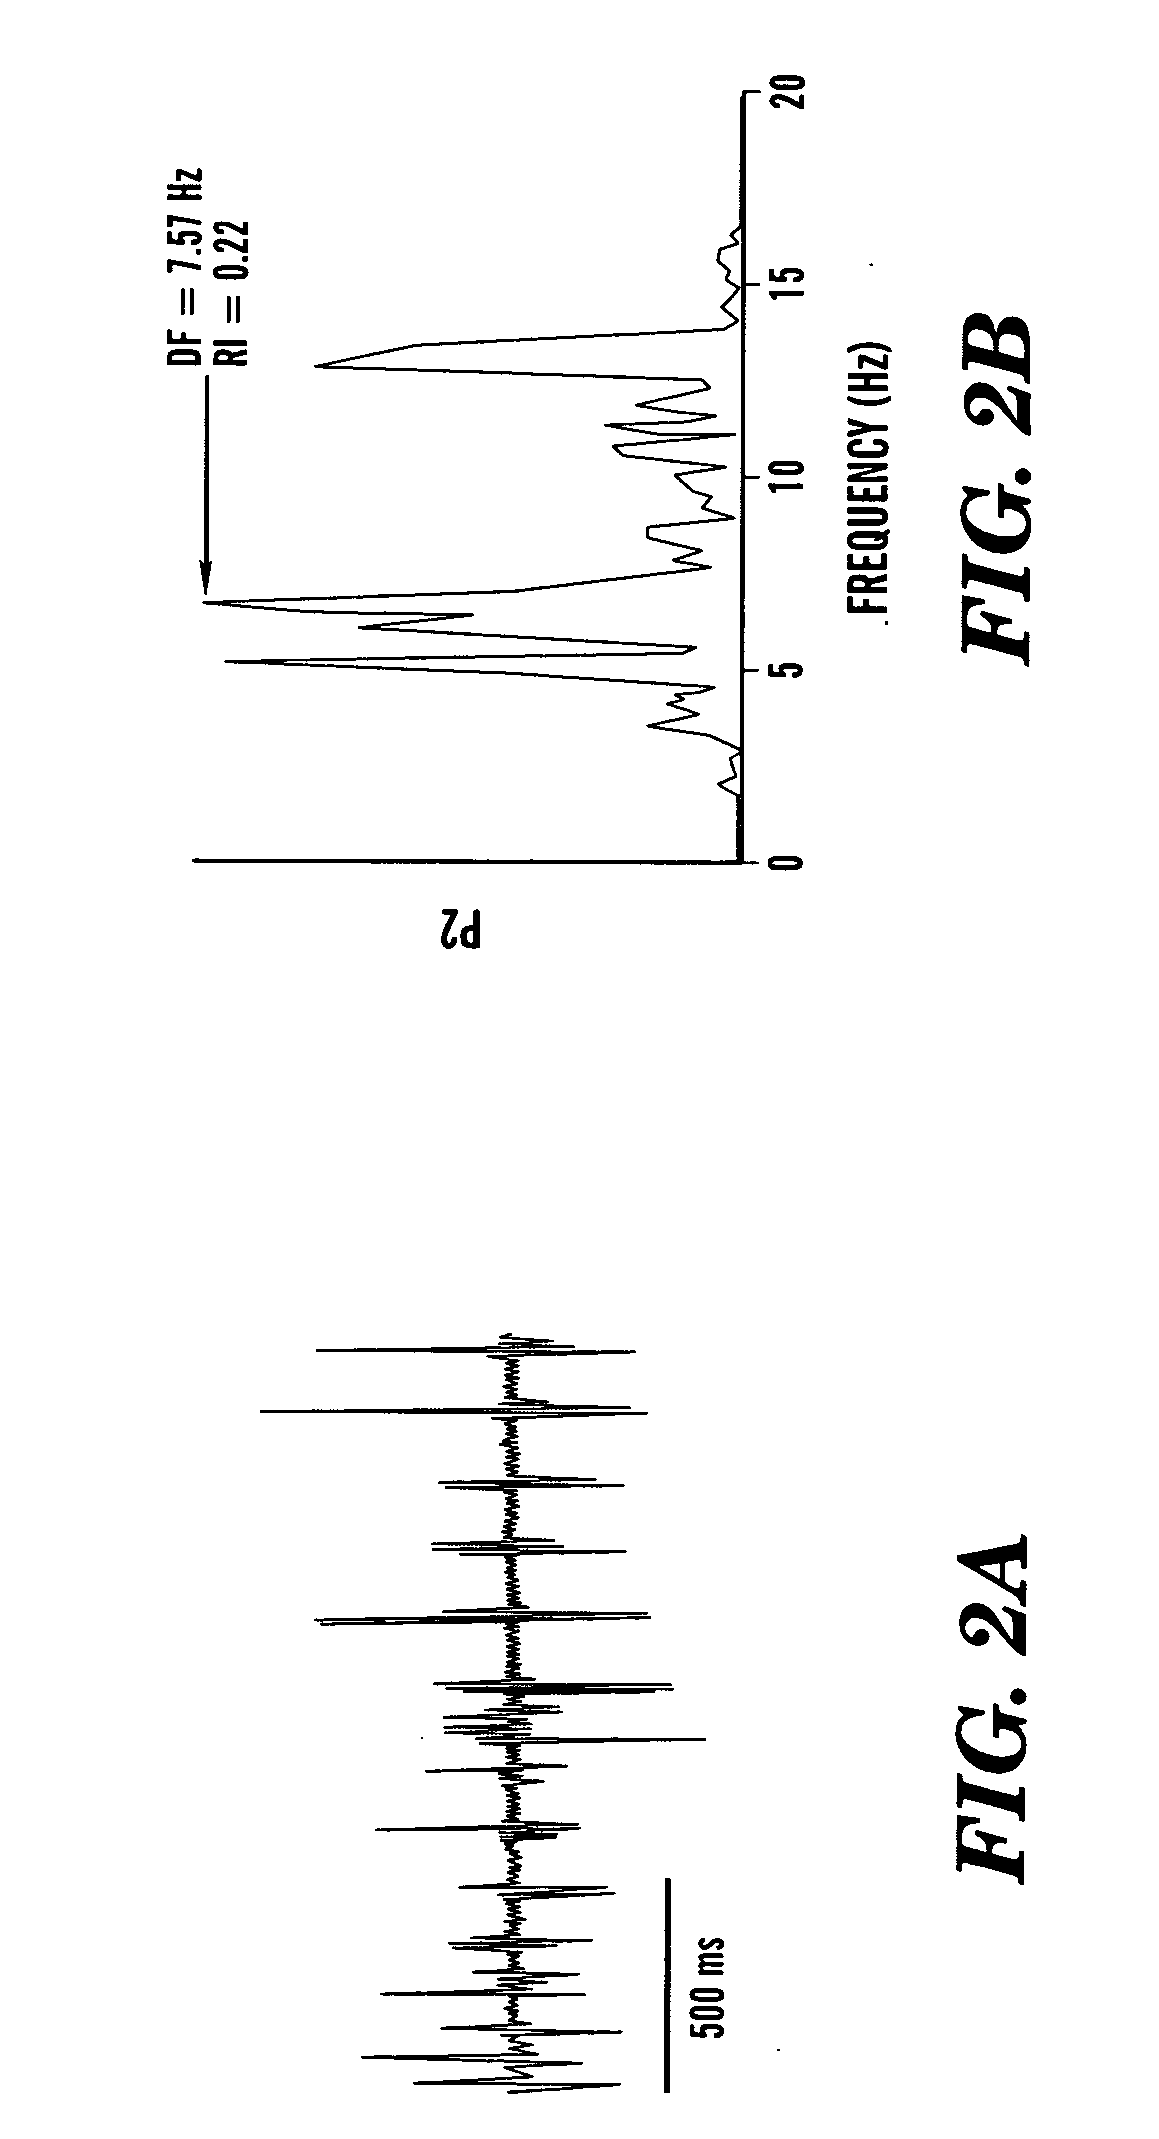 Method and algorithm for spatially identifying sources of cardiac fibrillation